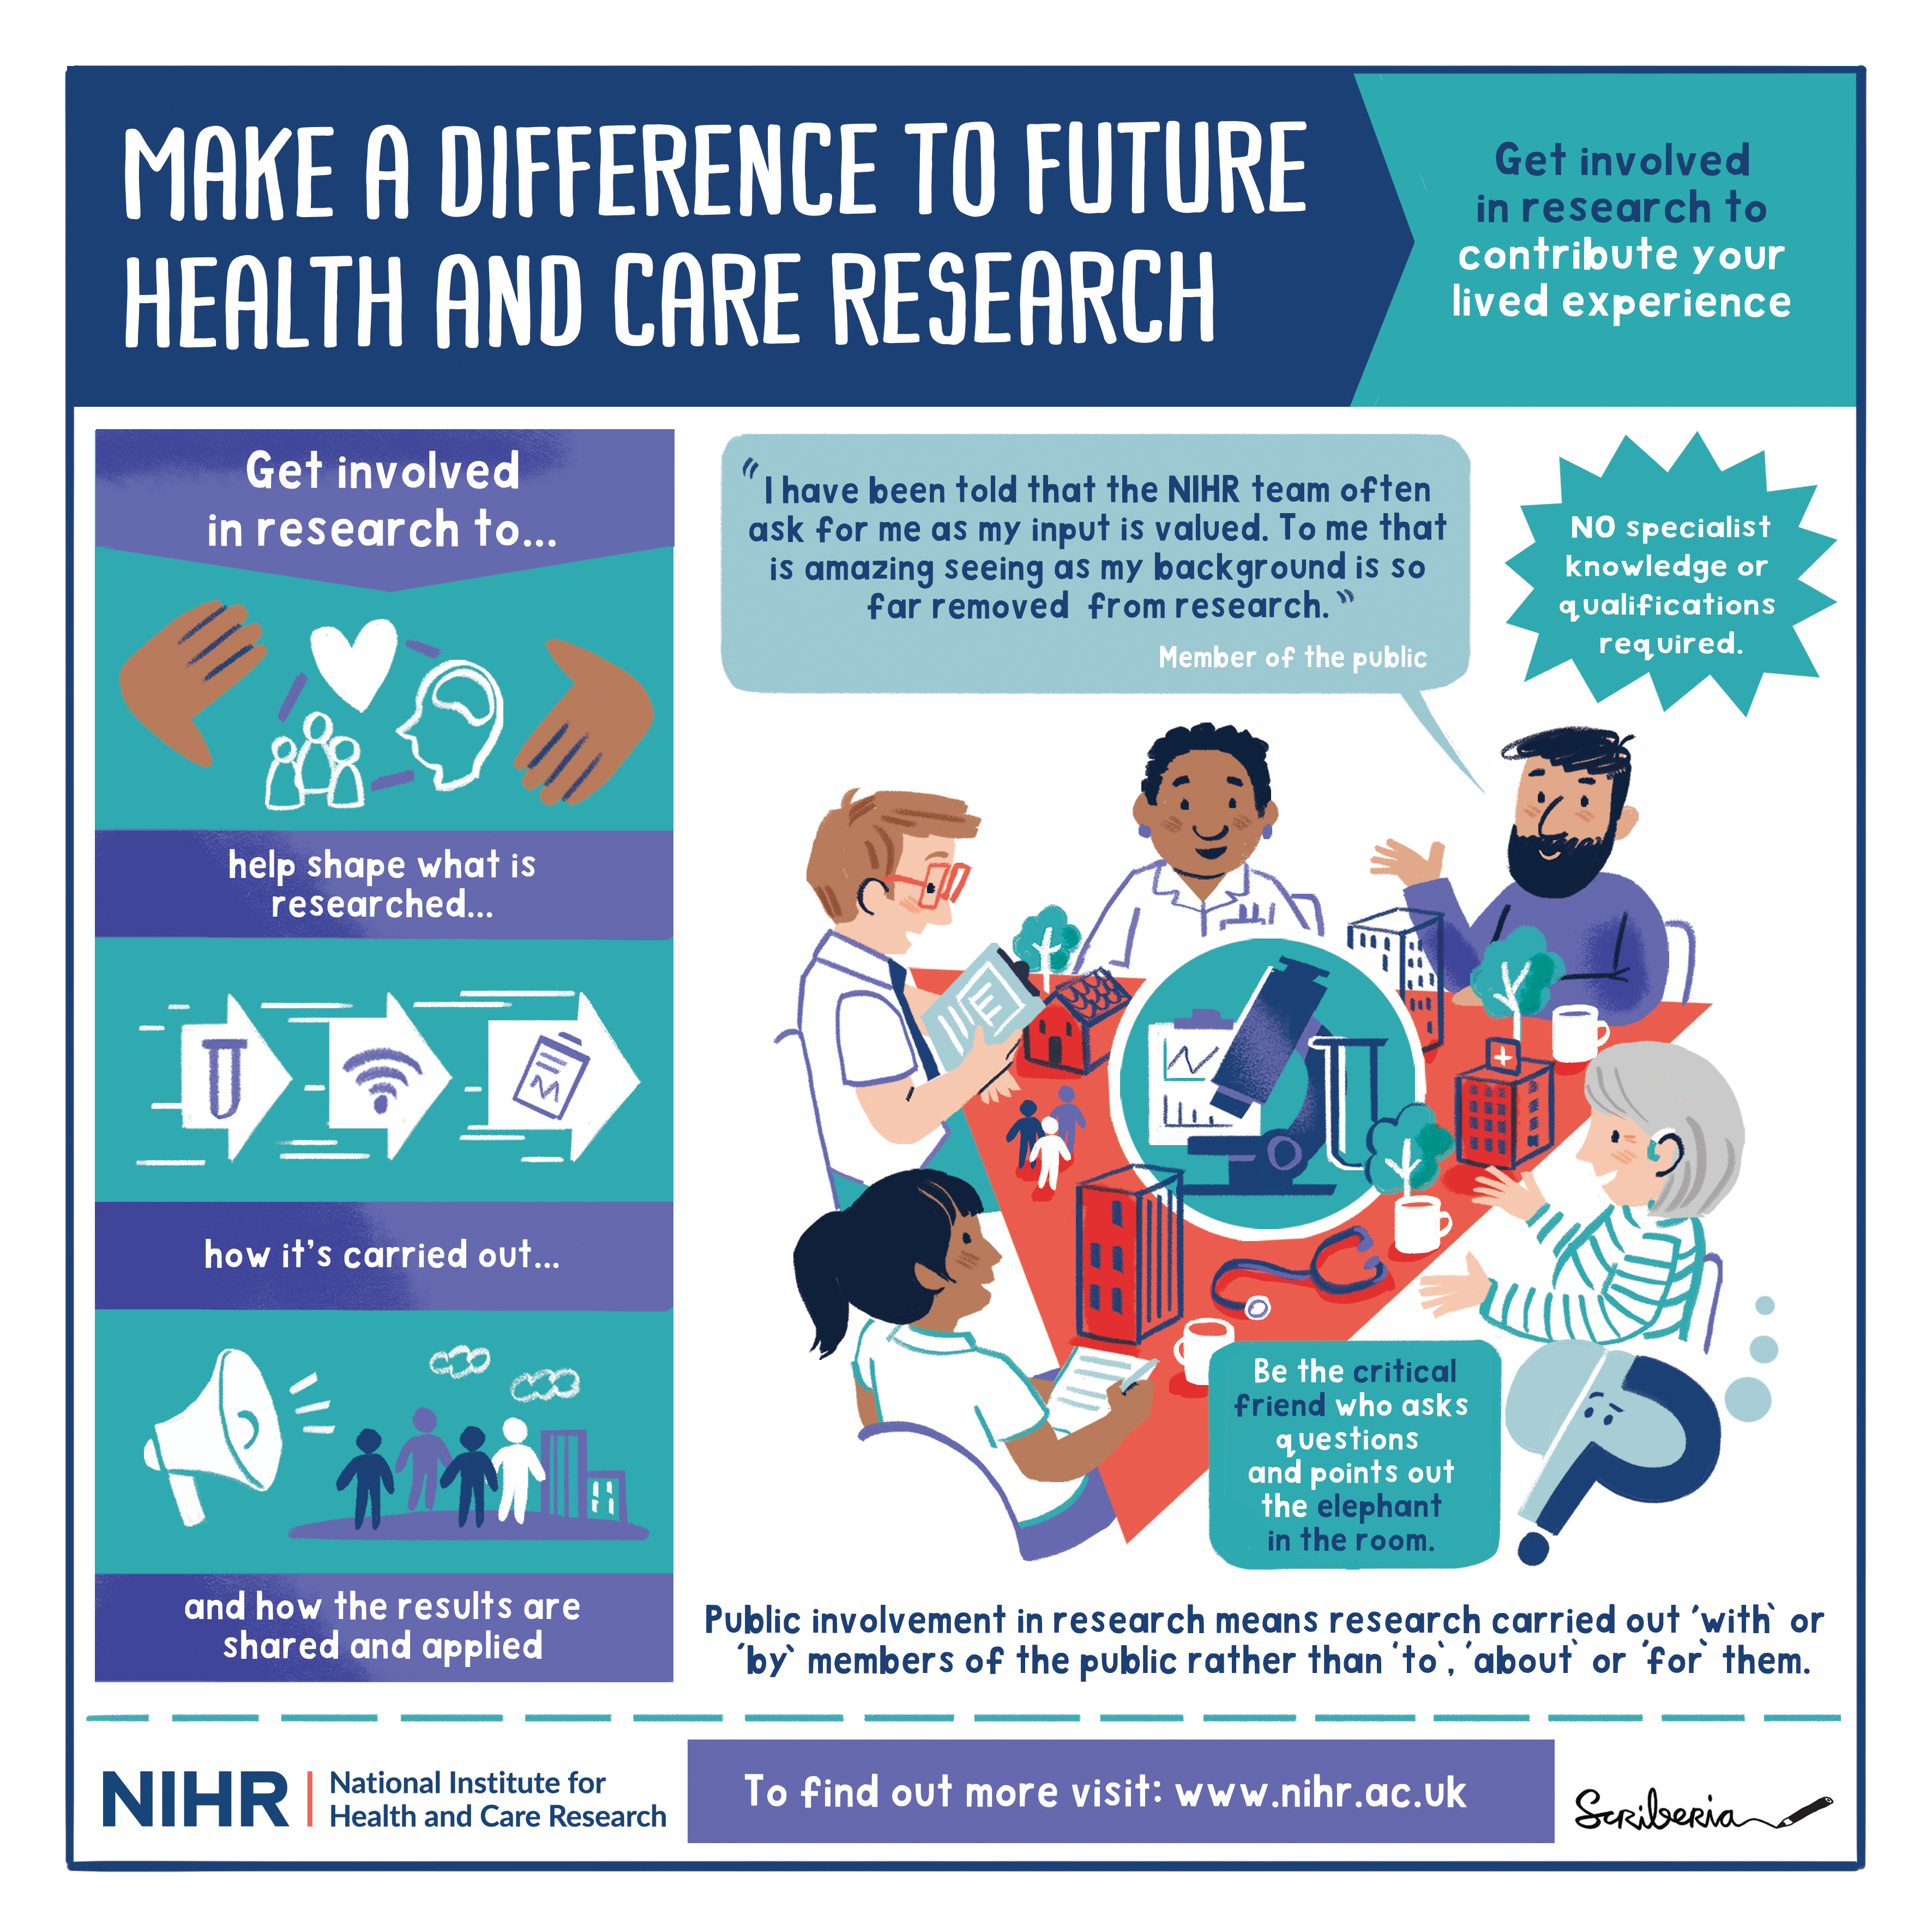 Make a Difference to Future Health and Care Research